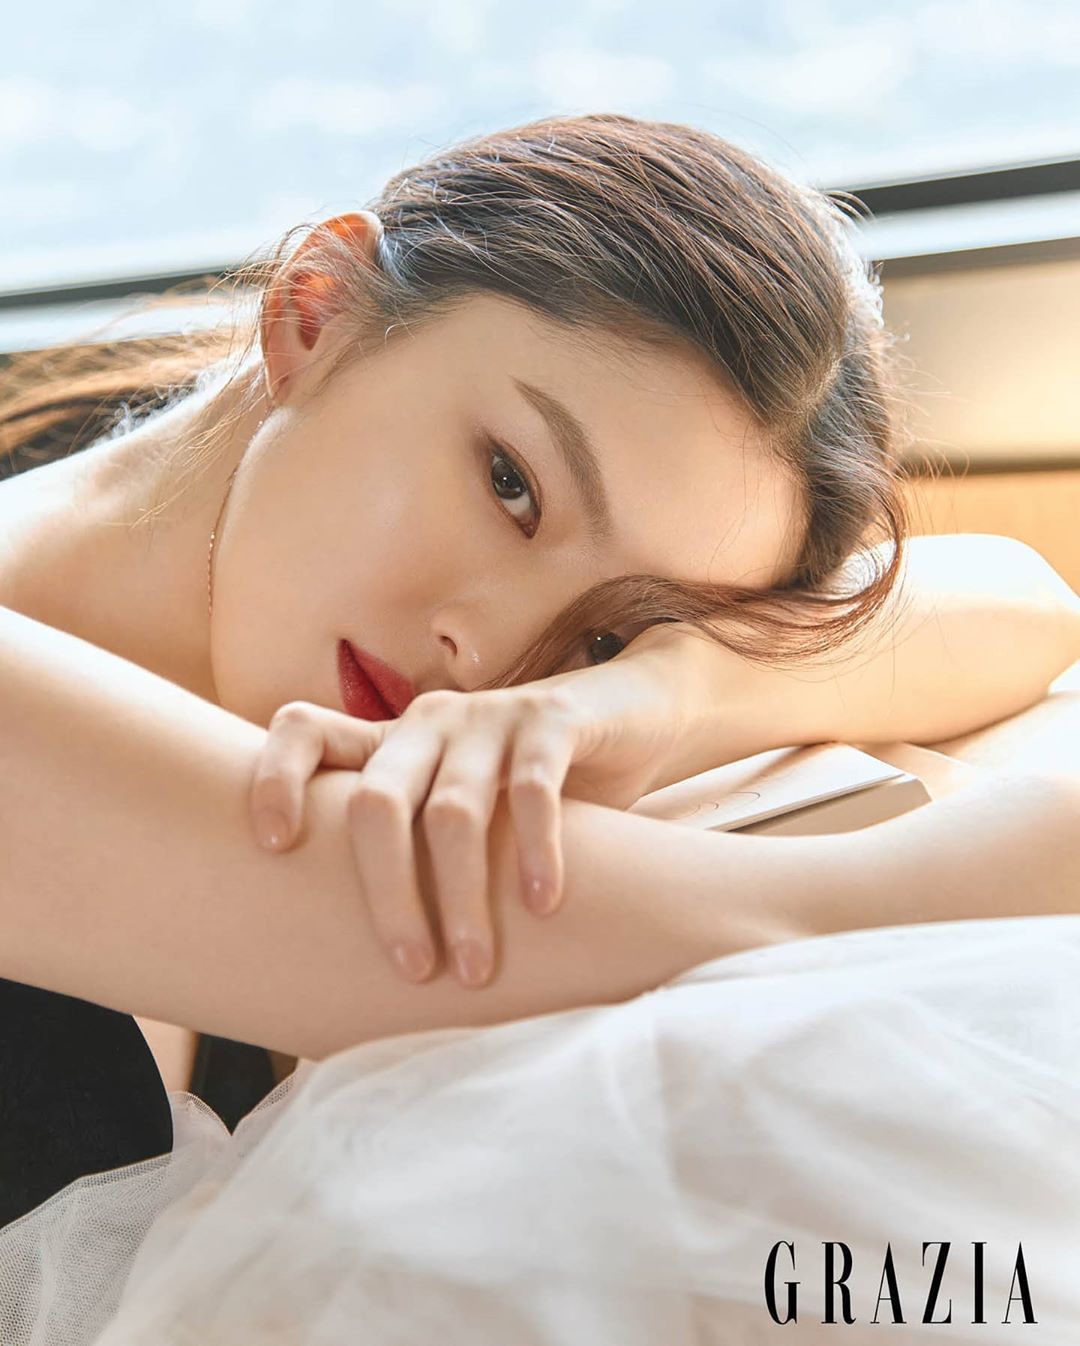 Han So Hee Is A Fascinating Beauty In The Photohoot Of Grazia +